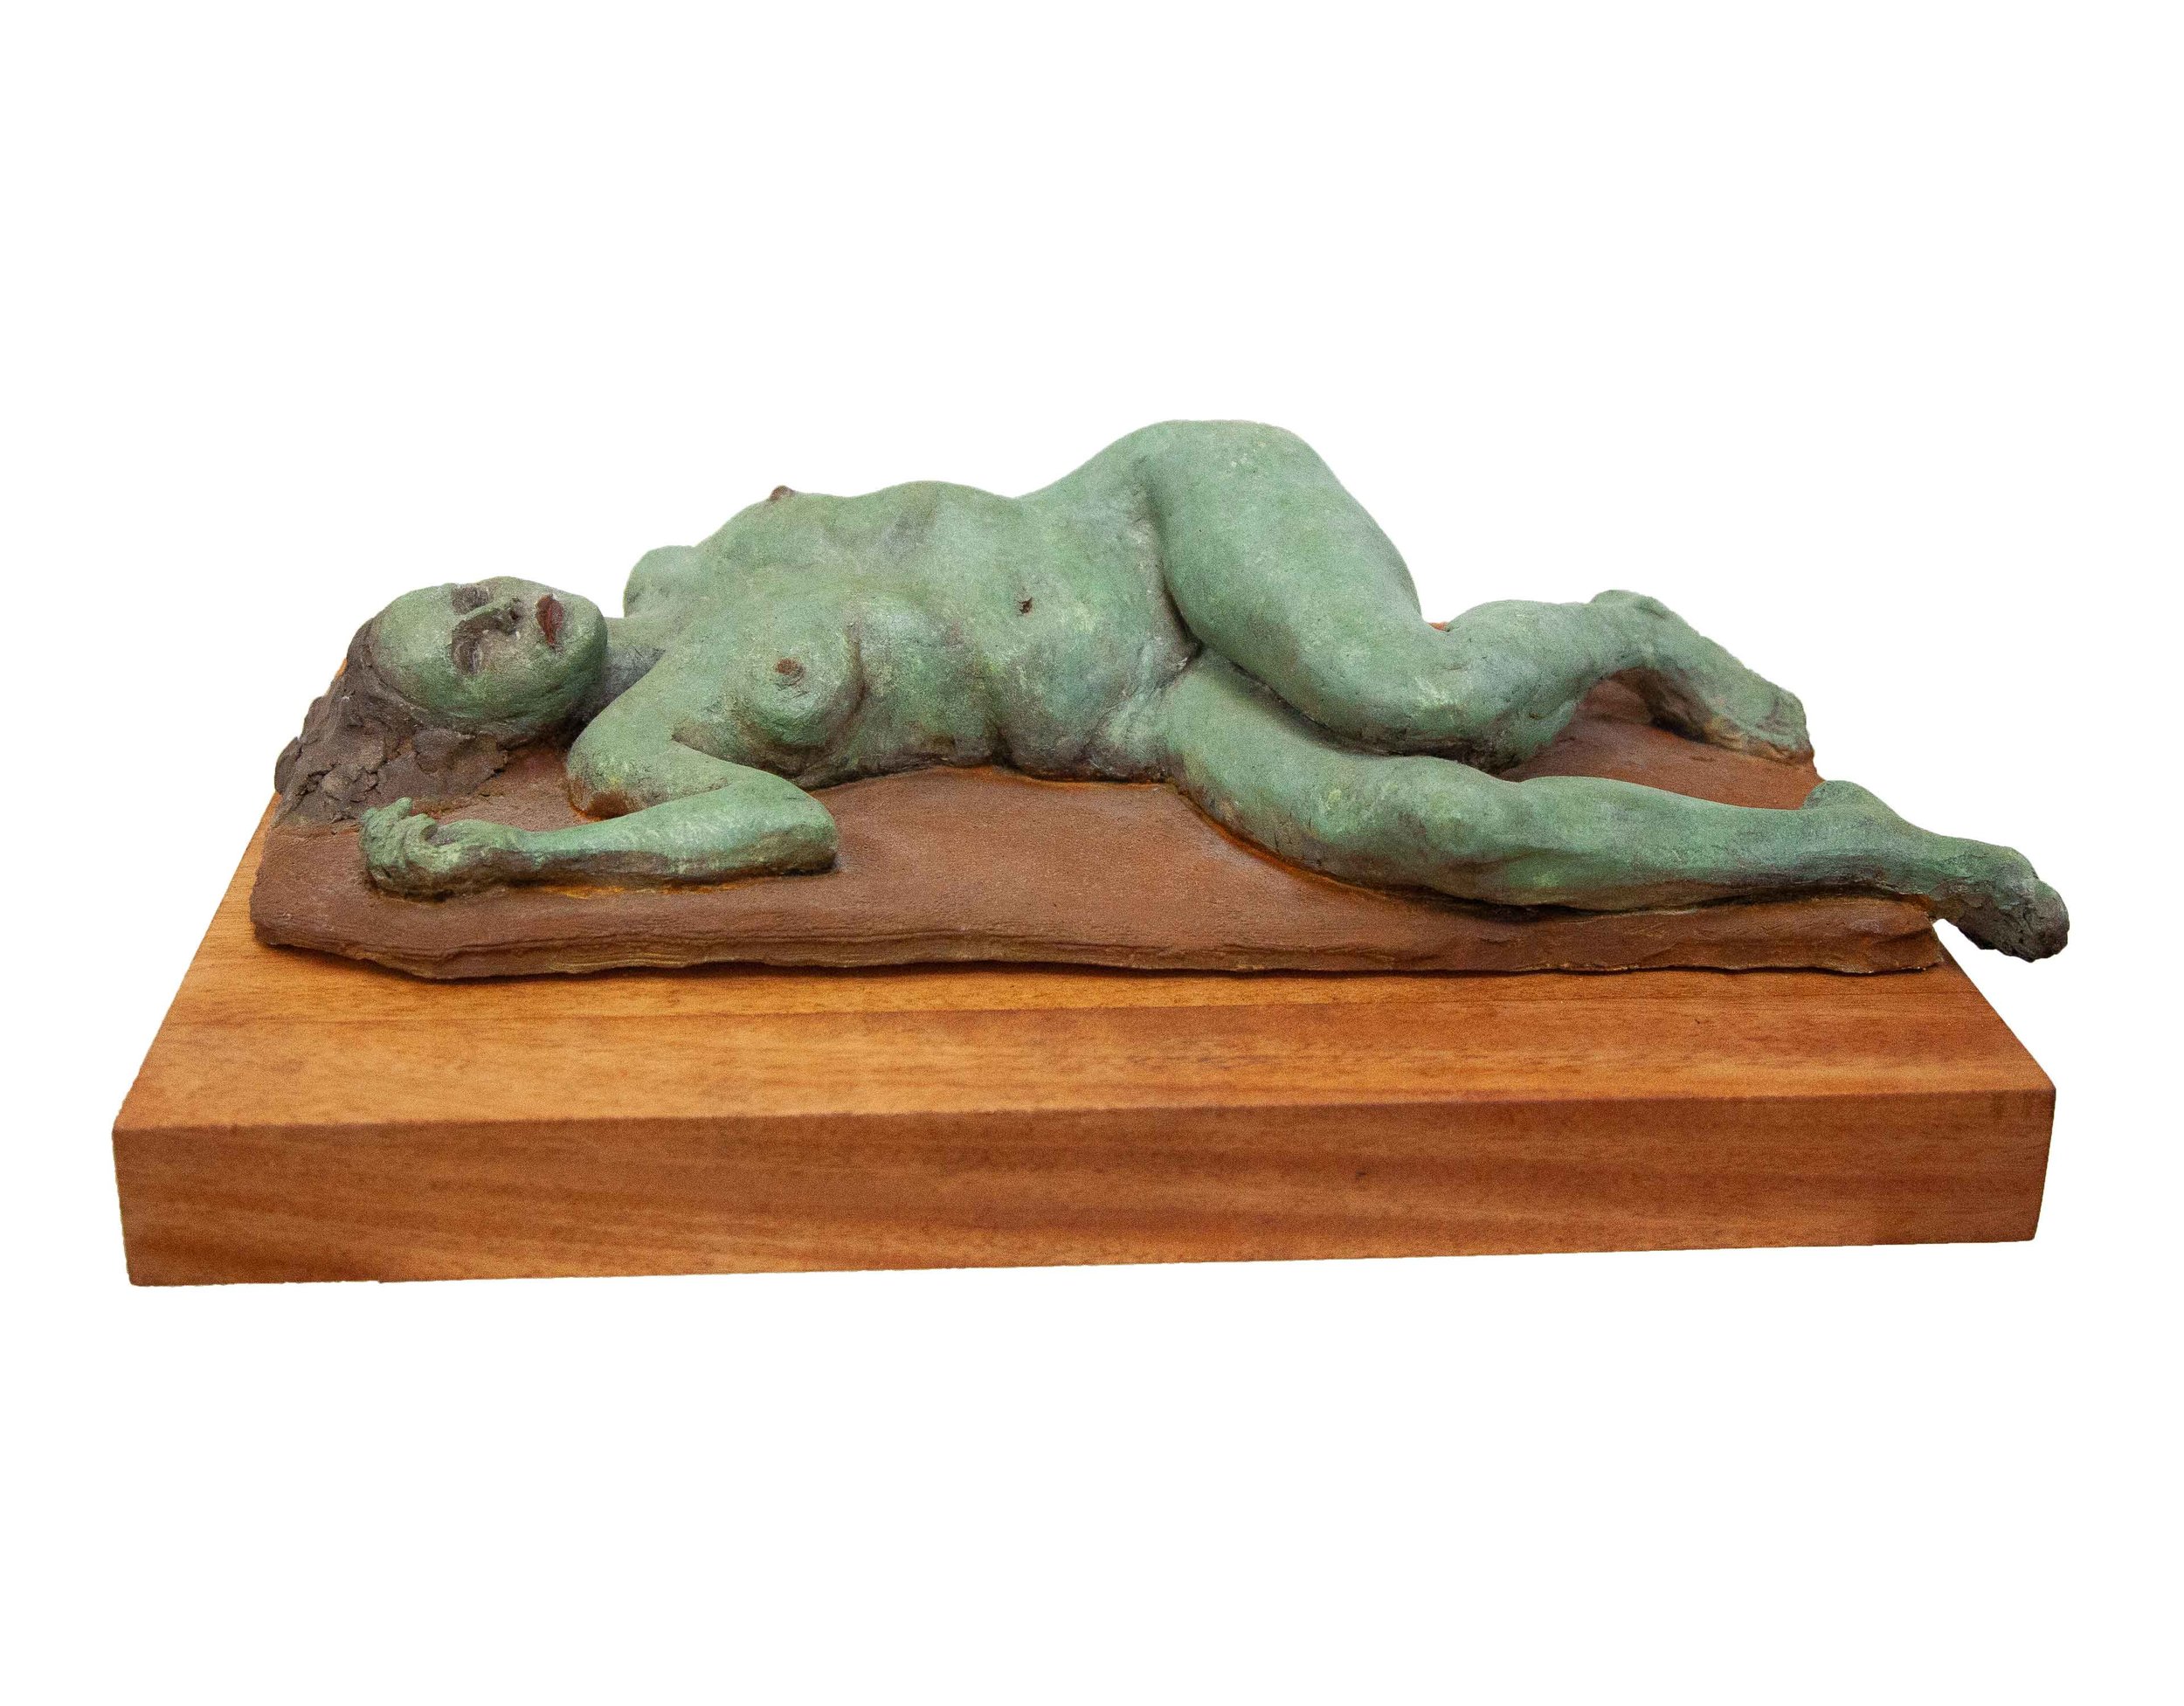  Resting  High Fired Clay w/ Rusted Patina  15” x 13.5” x 18” 